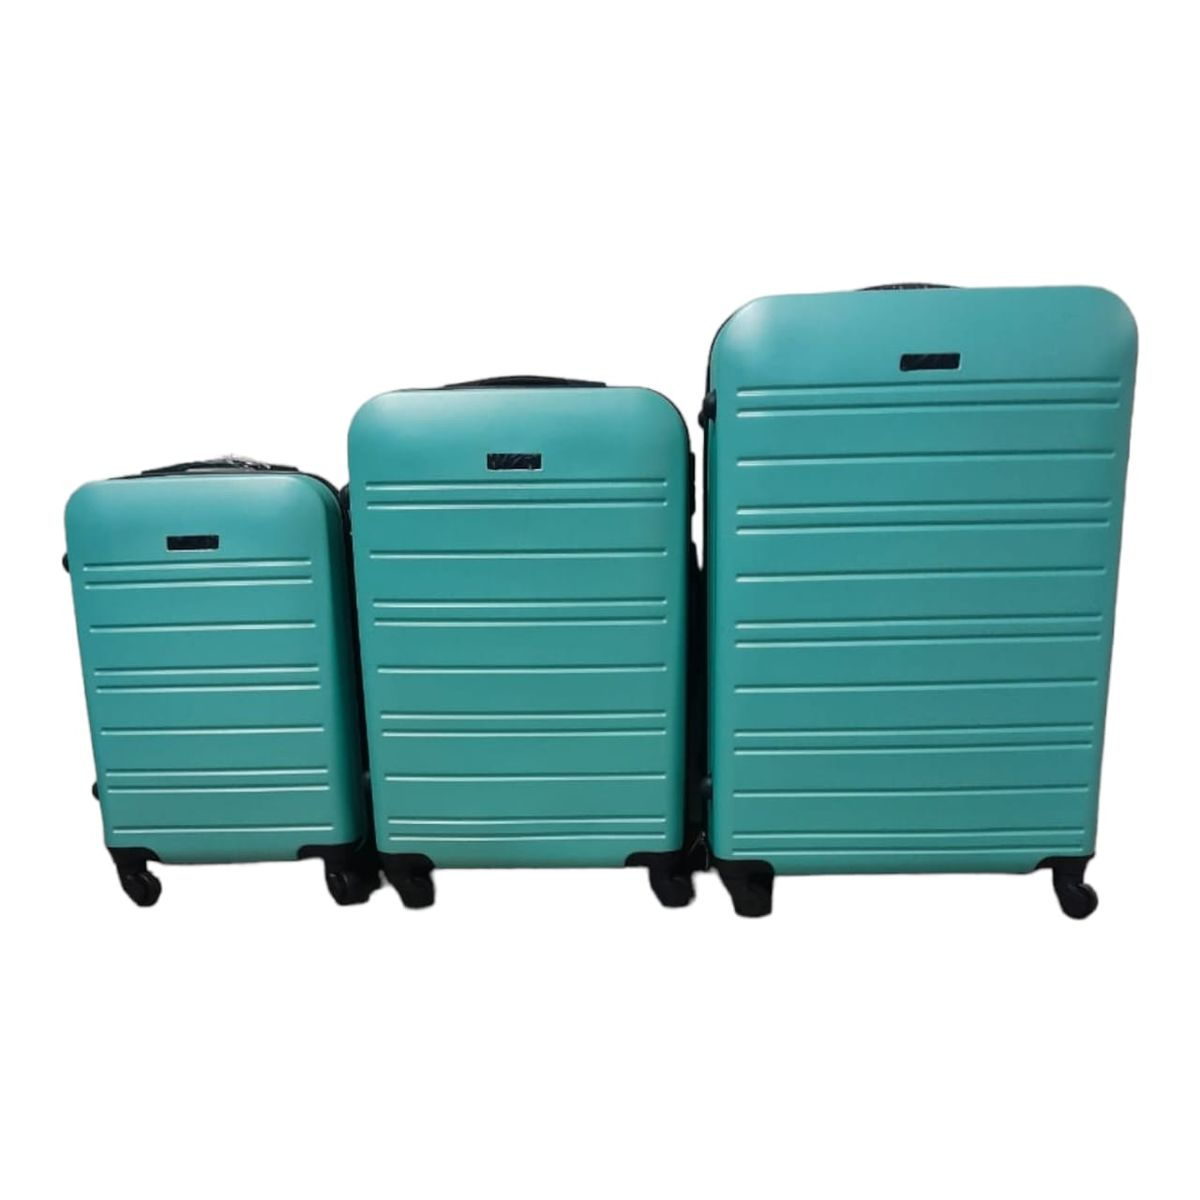 ABS Luggage Set Ideal for Travelers Turquoise - 3-Piece